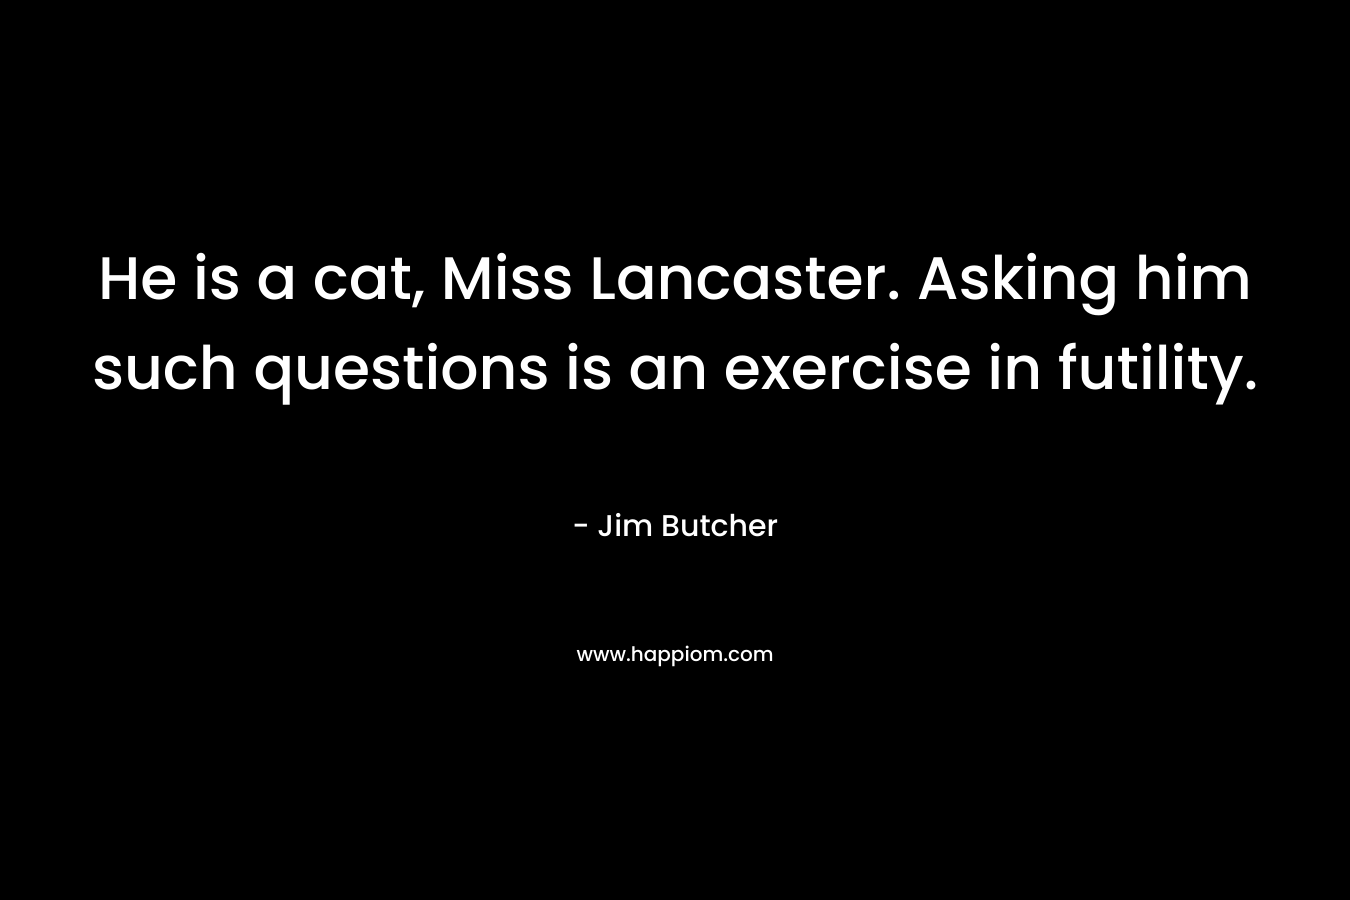 He is a cat, Miss Lancaster. Asking him such questions is an exercise in futility. – Jim Butcher